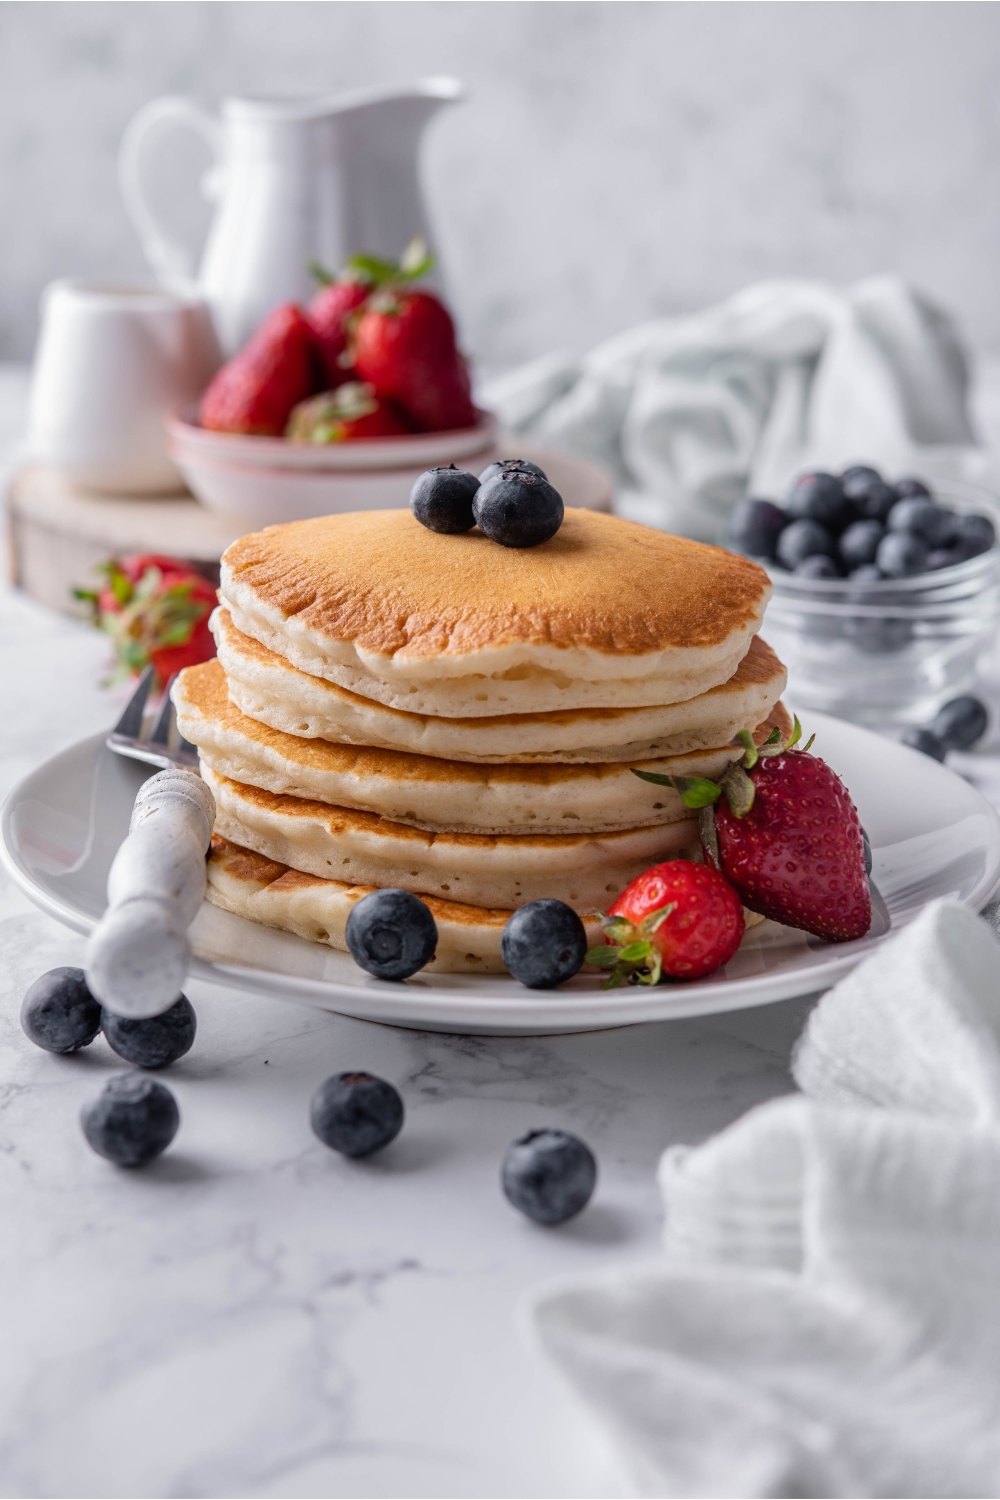 A stack of pancakes topped with blueberries on a white plate with a fork and strawberries on the plate beside the pancakes. Berries are scattered on the counter and in the background.